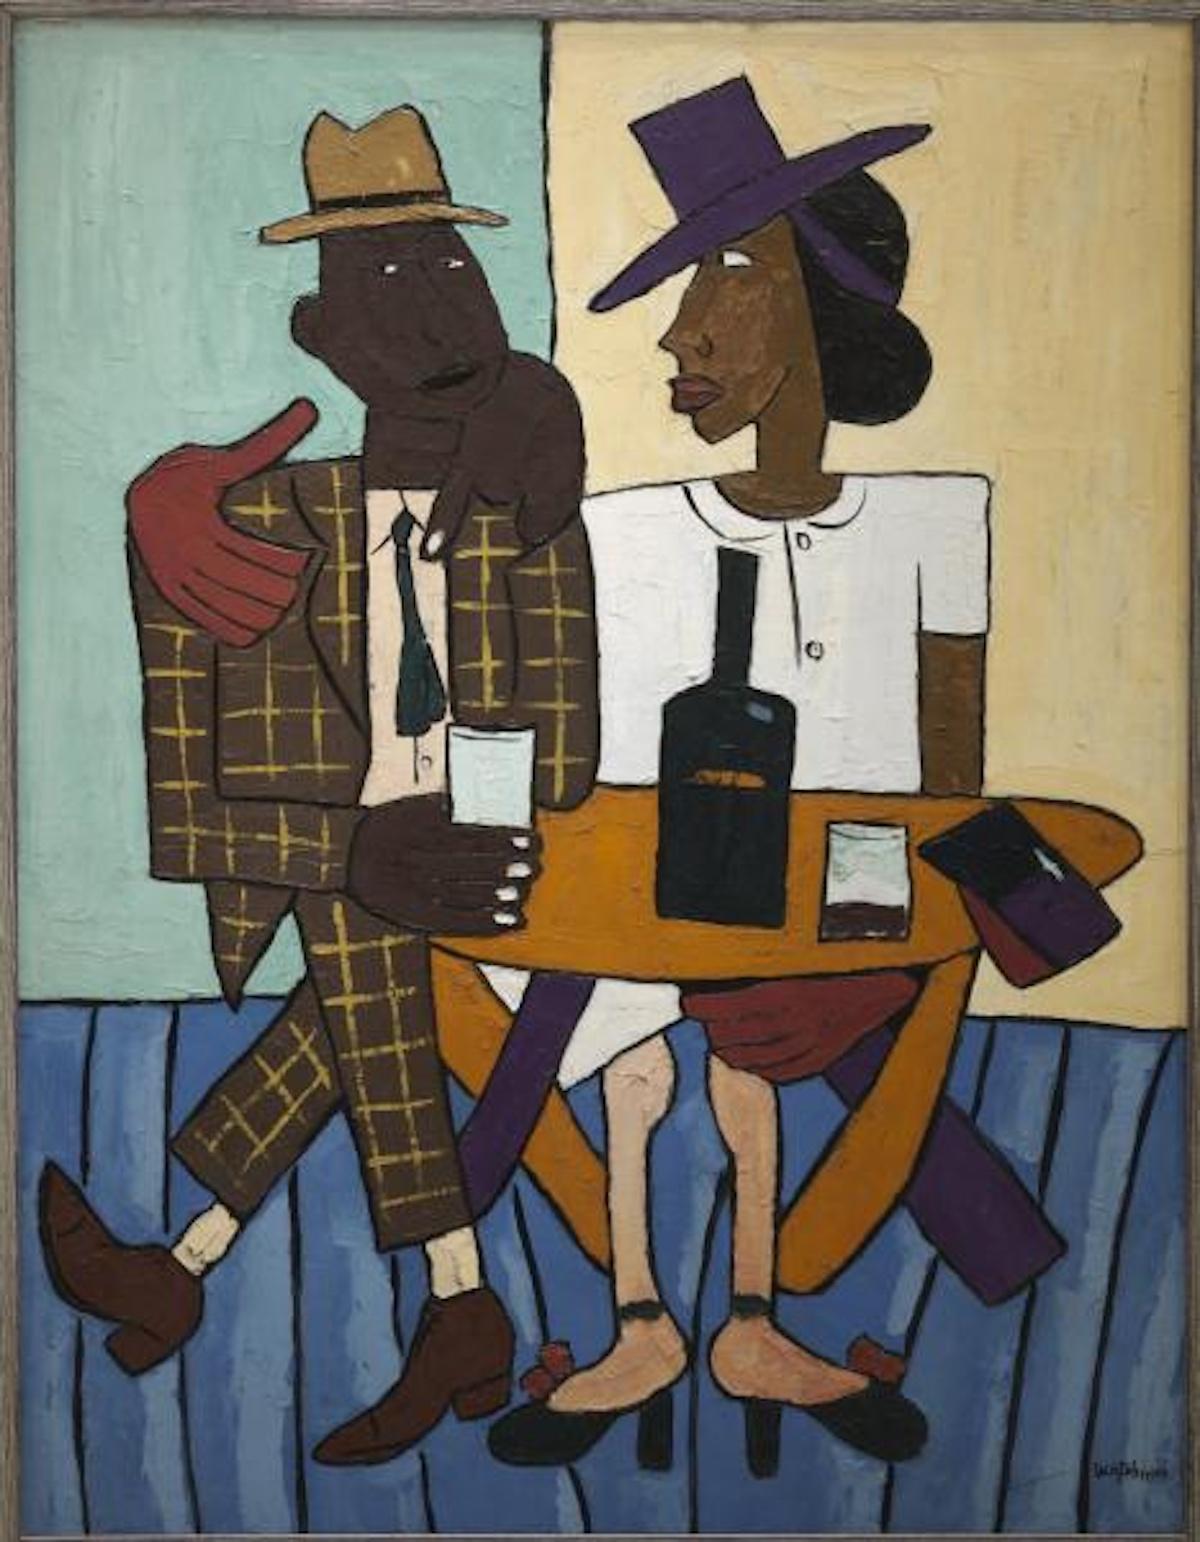 William H. Johnson, Café, 1939-1940. Oil on paperboard, 36.5 x 28.375 in. (92.7 x 72.2 cm.), Smithsonian American Art Museum, Gift of the Harmon Foundation, Washington, D.C